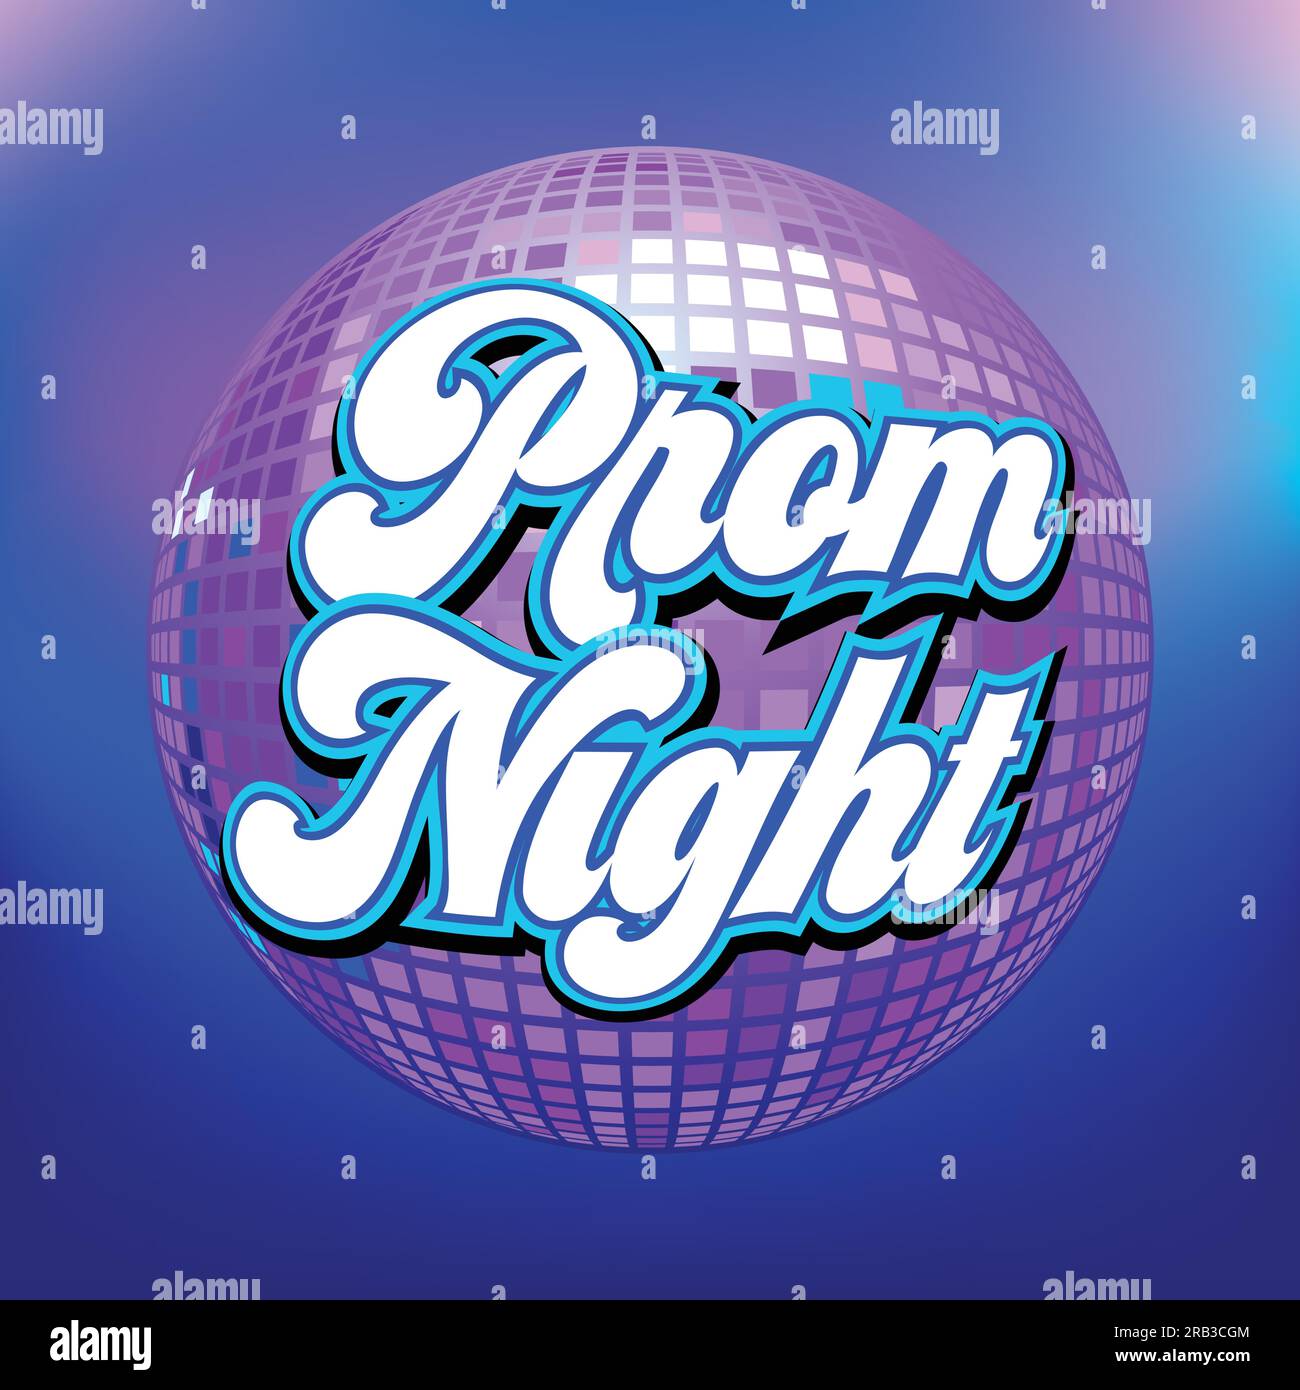 Prom night party background for poster or flyer Stock Vector